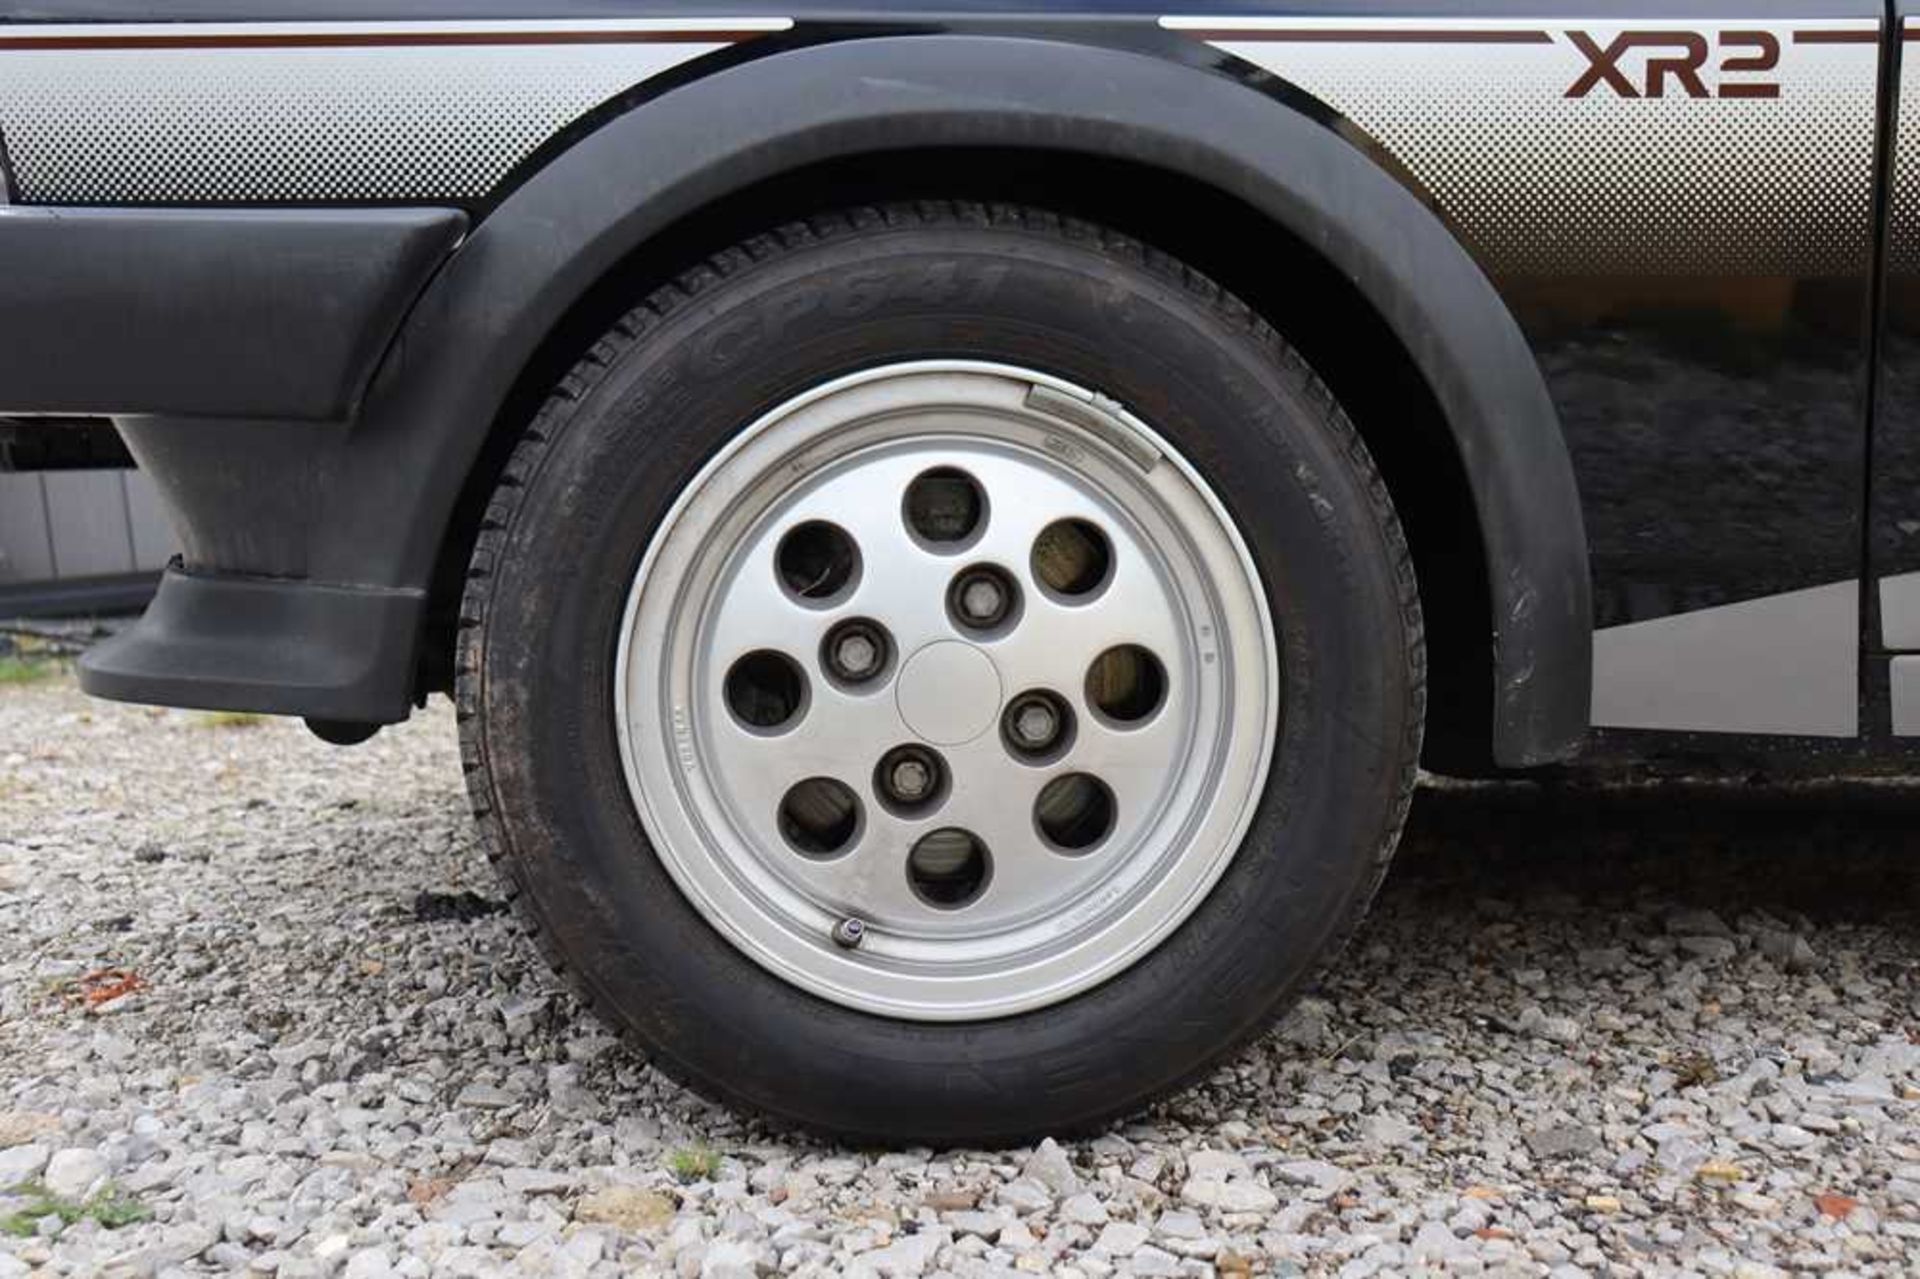 1983 Ford Fiesta XR2 - Image 39 of 56